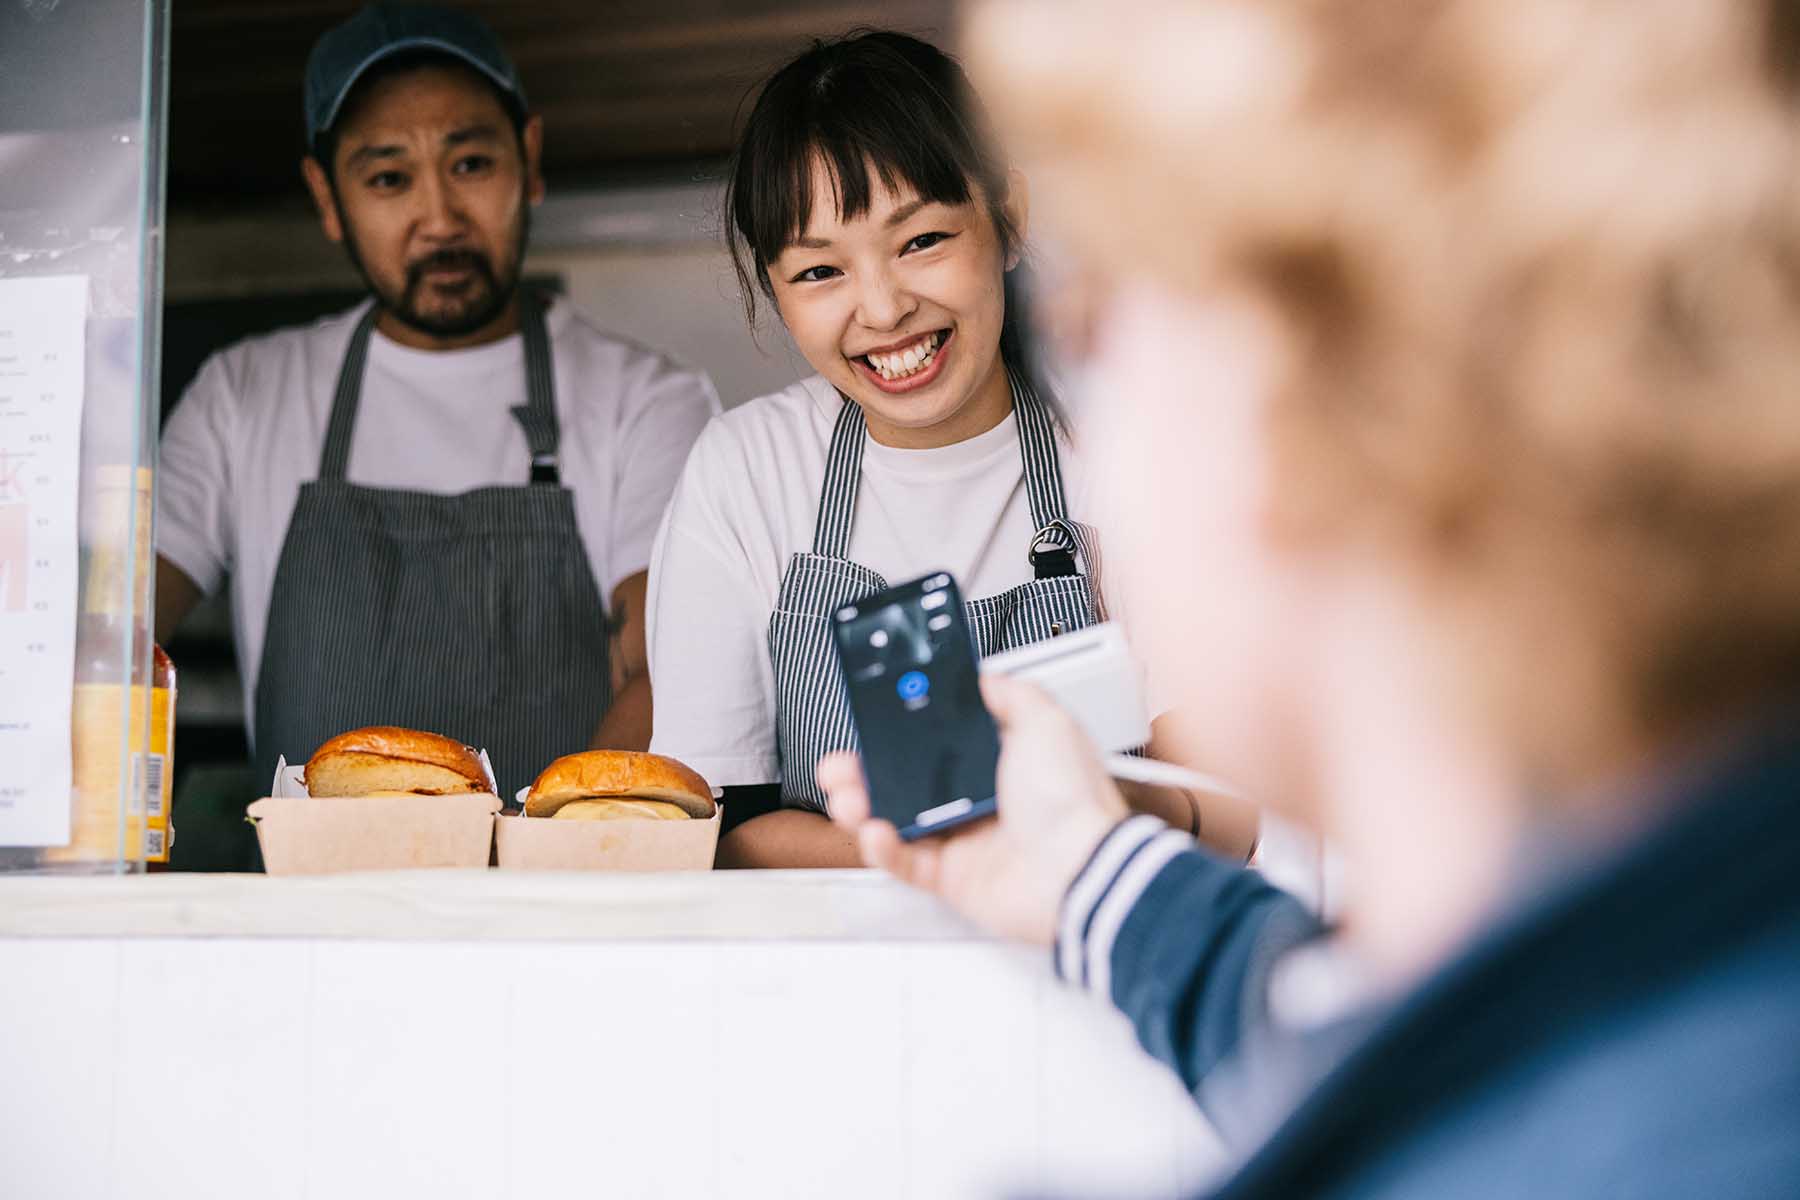 Sales woman of a food truck is smiling as the customer makes an online payment with their phone. Her colleague is standing behind her, looking at the customer somewhat suspiciously.